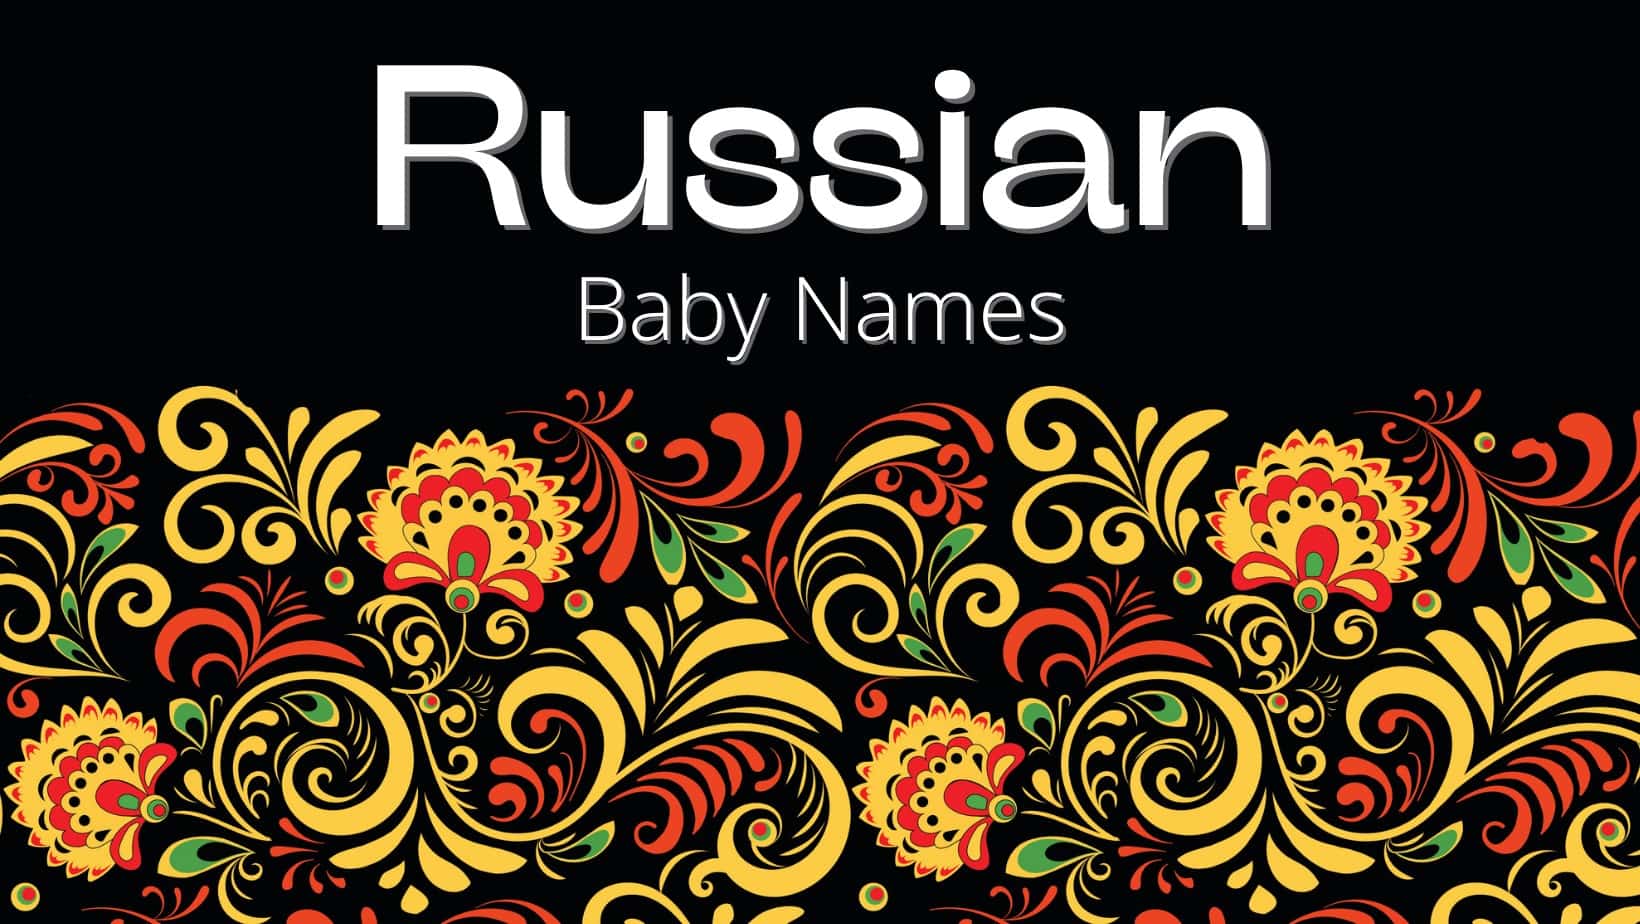 Russian baby names